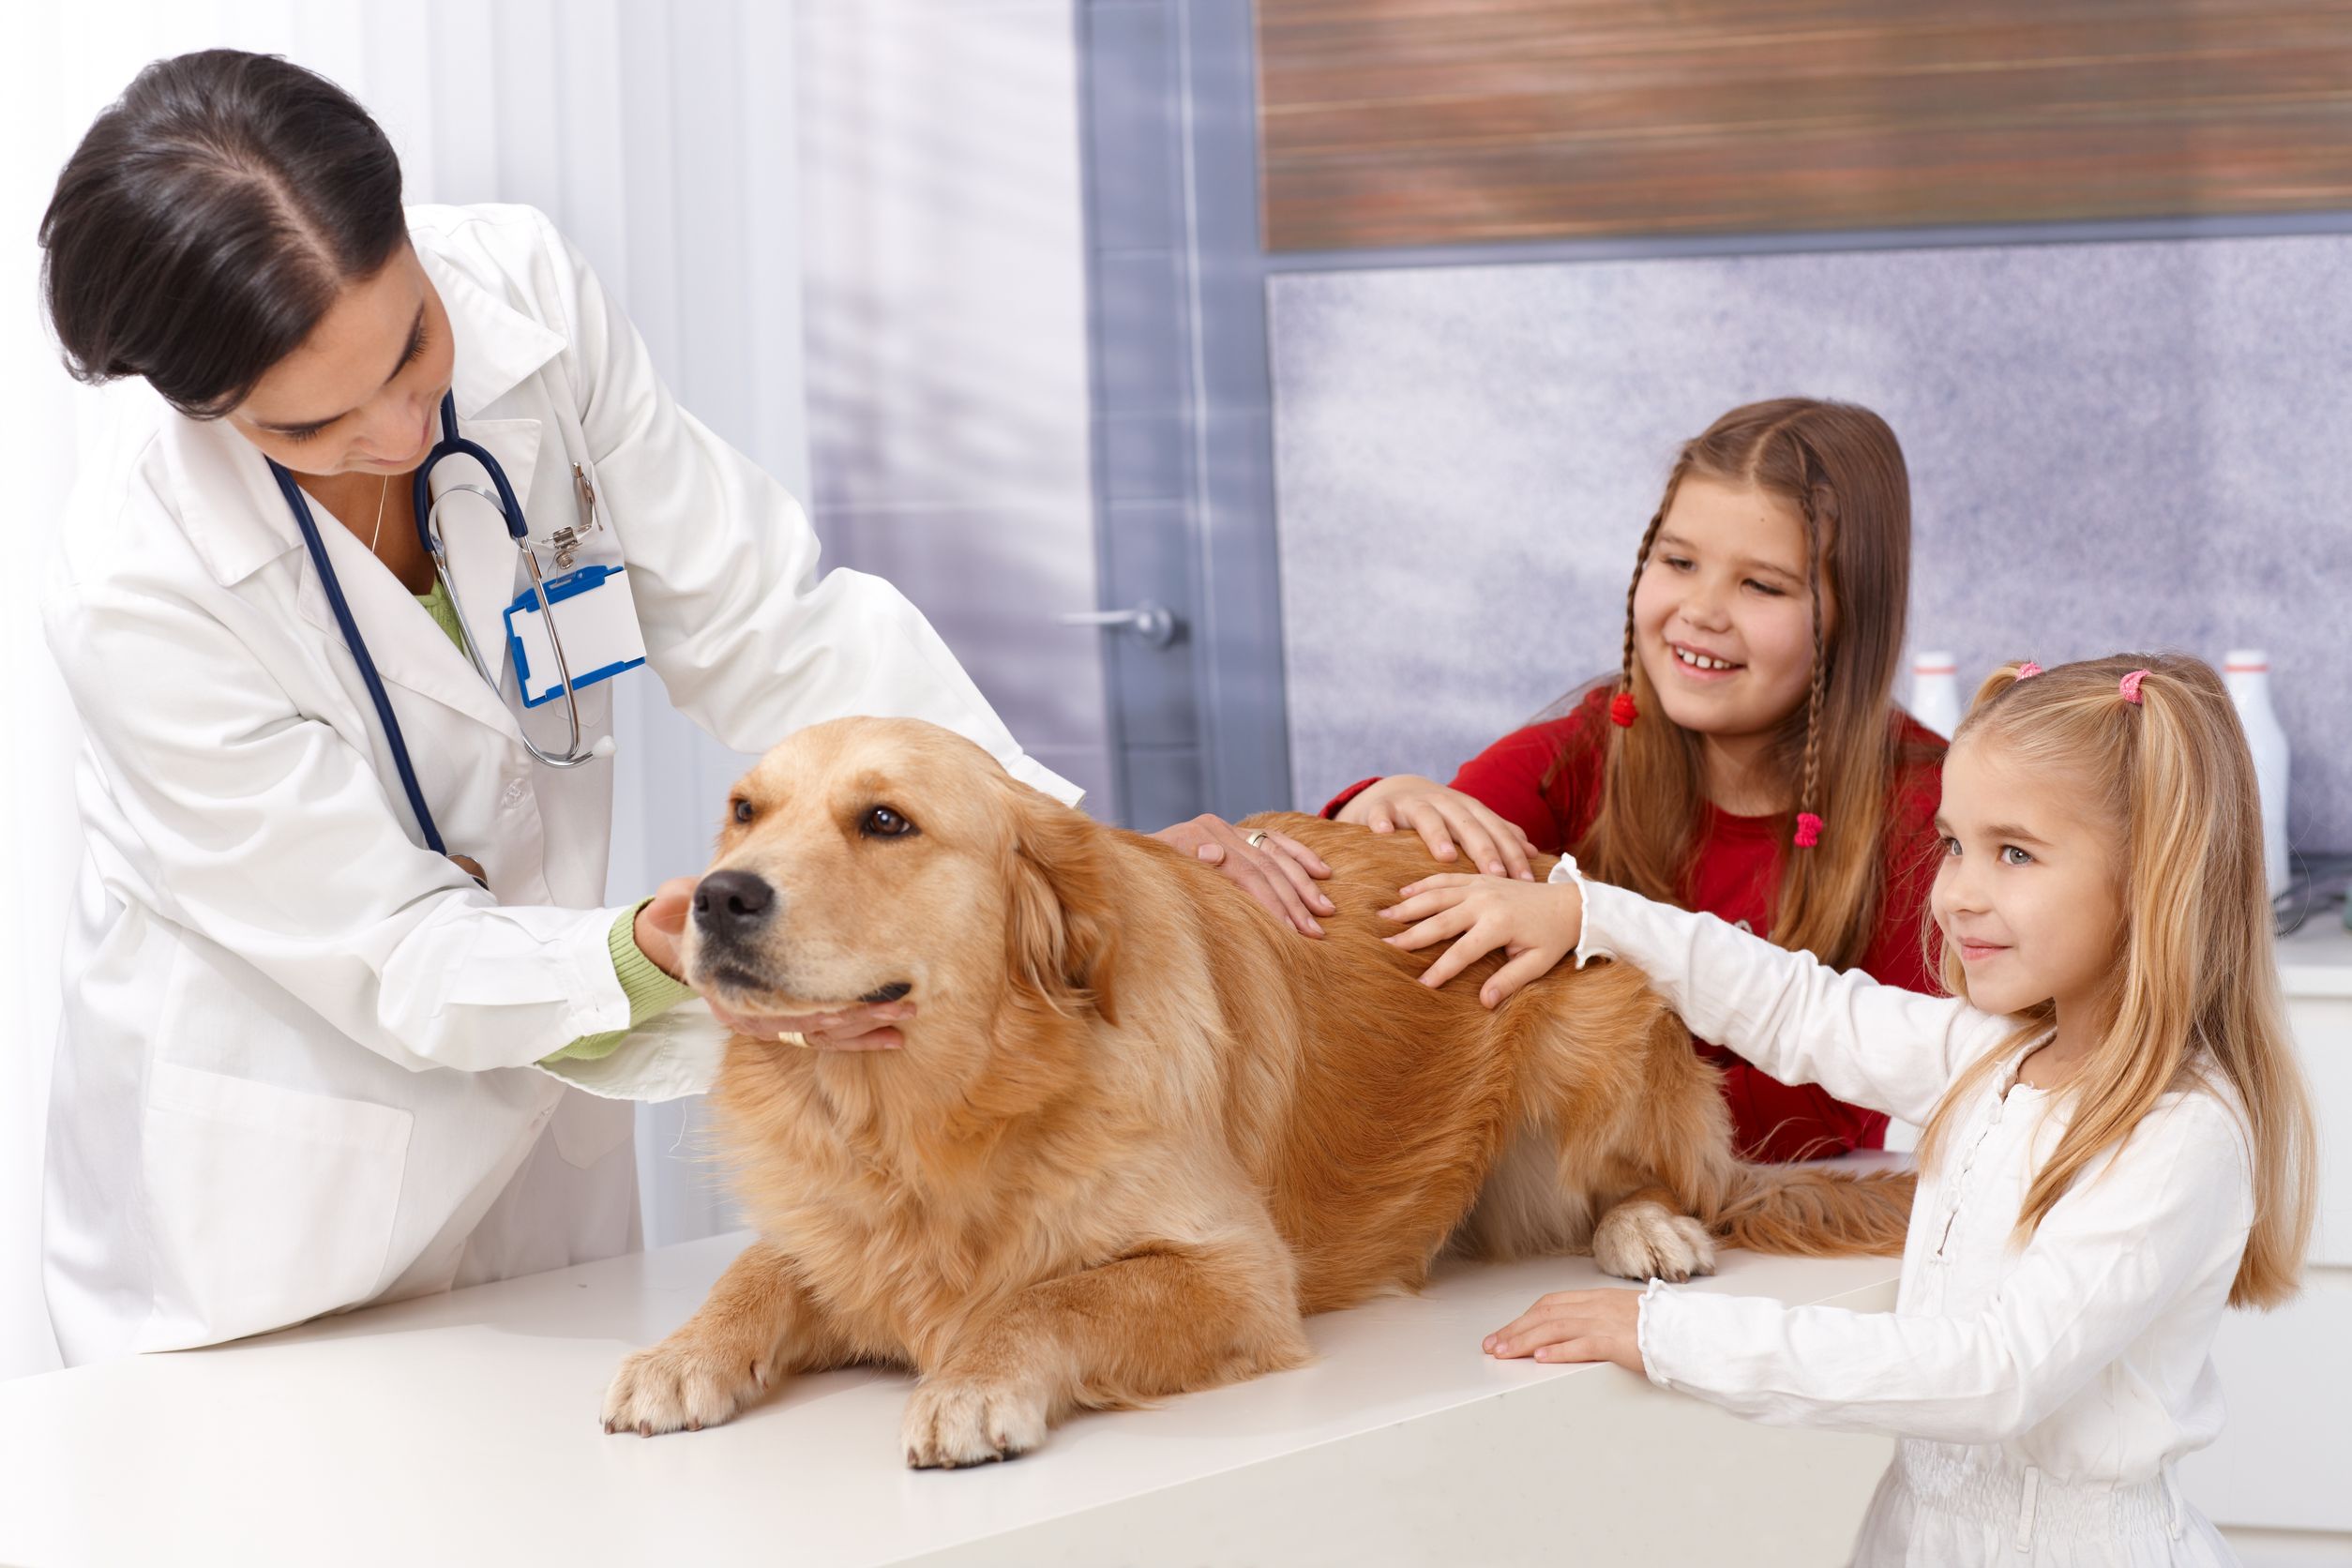 Veterinary assistant